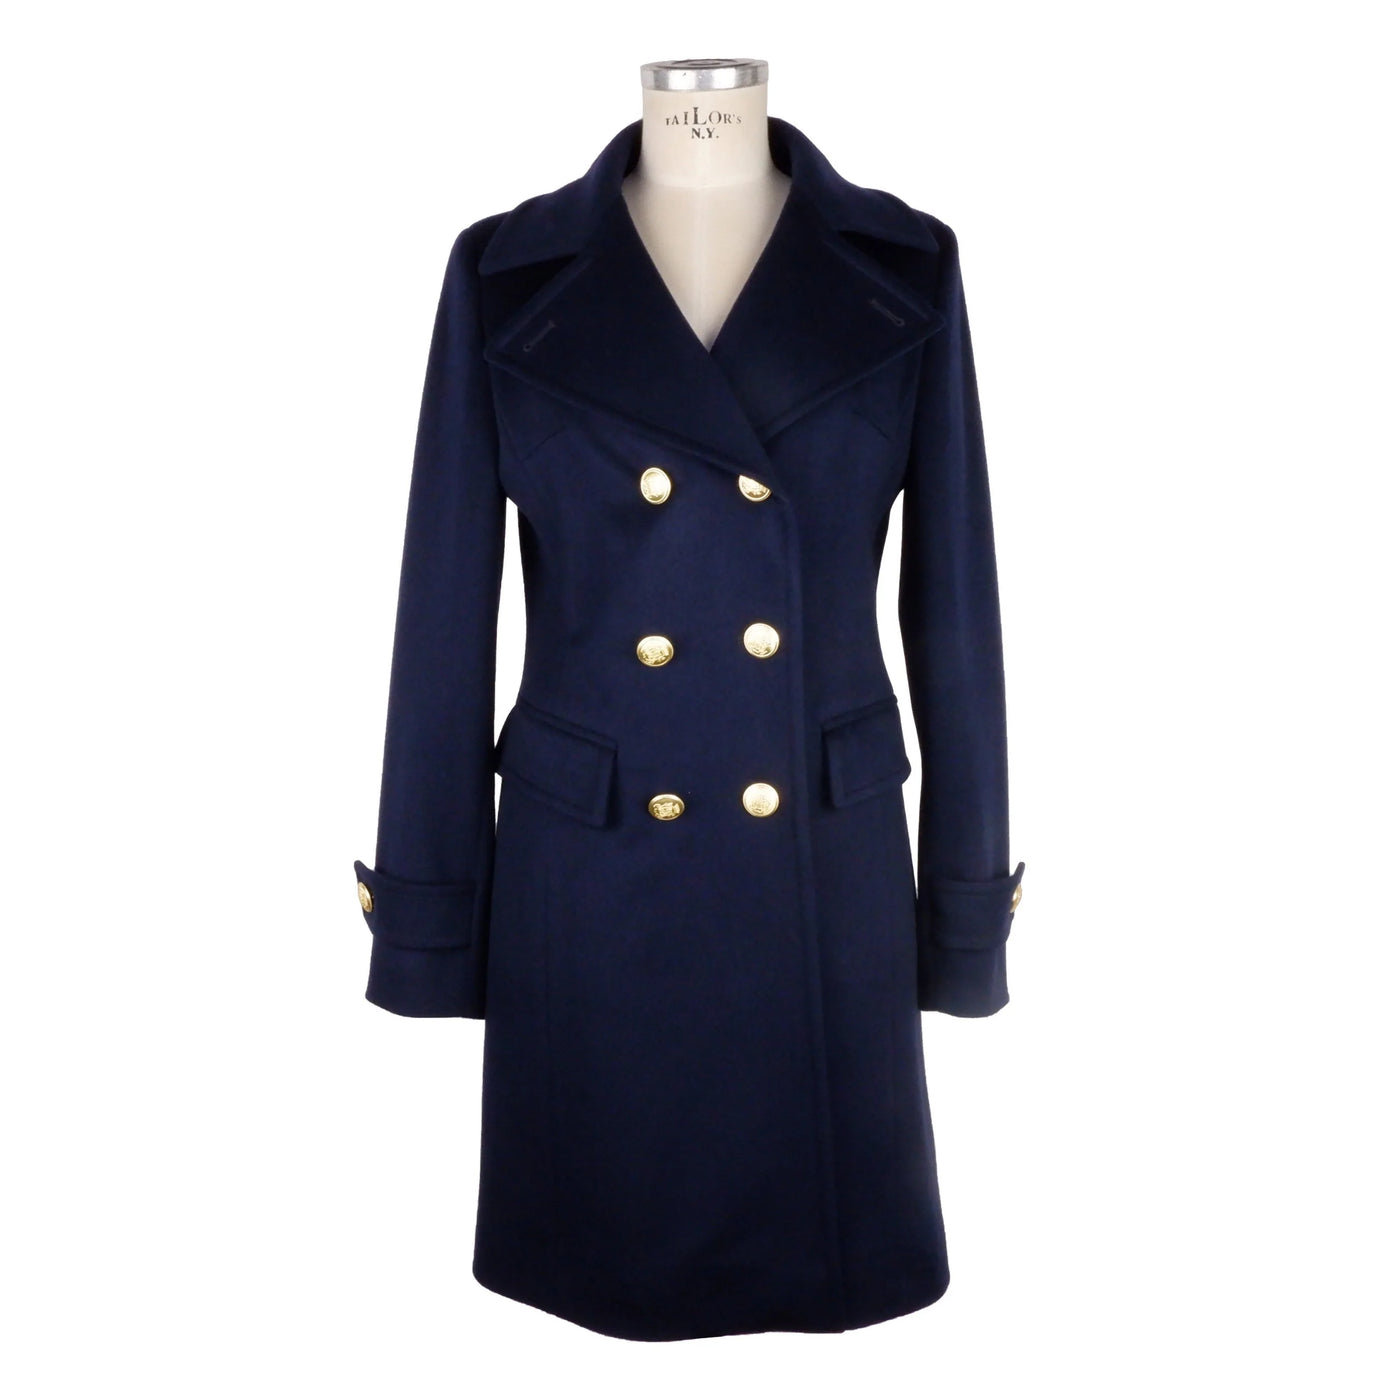 Made in Italy Blue Wool Jackets & Coat Blue, feed-1, IT44|L, IT46 | L, IT48 | XL, Jackets & Coats - Women - Clothing, Made in Italy at SEYMAYKA